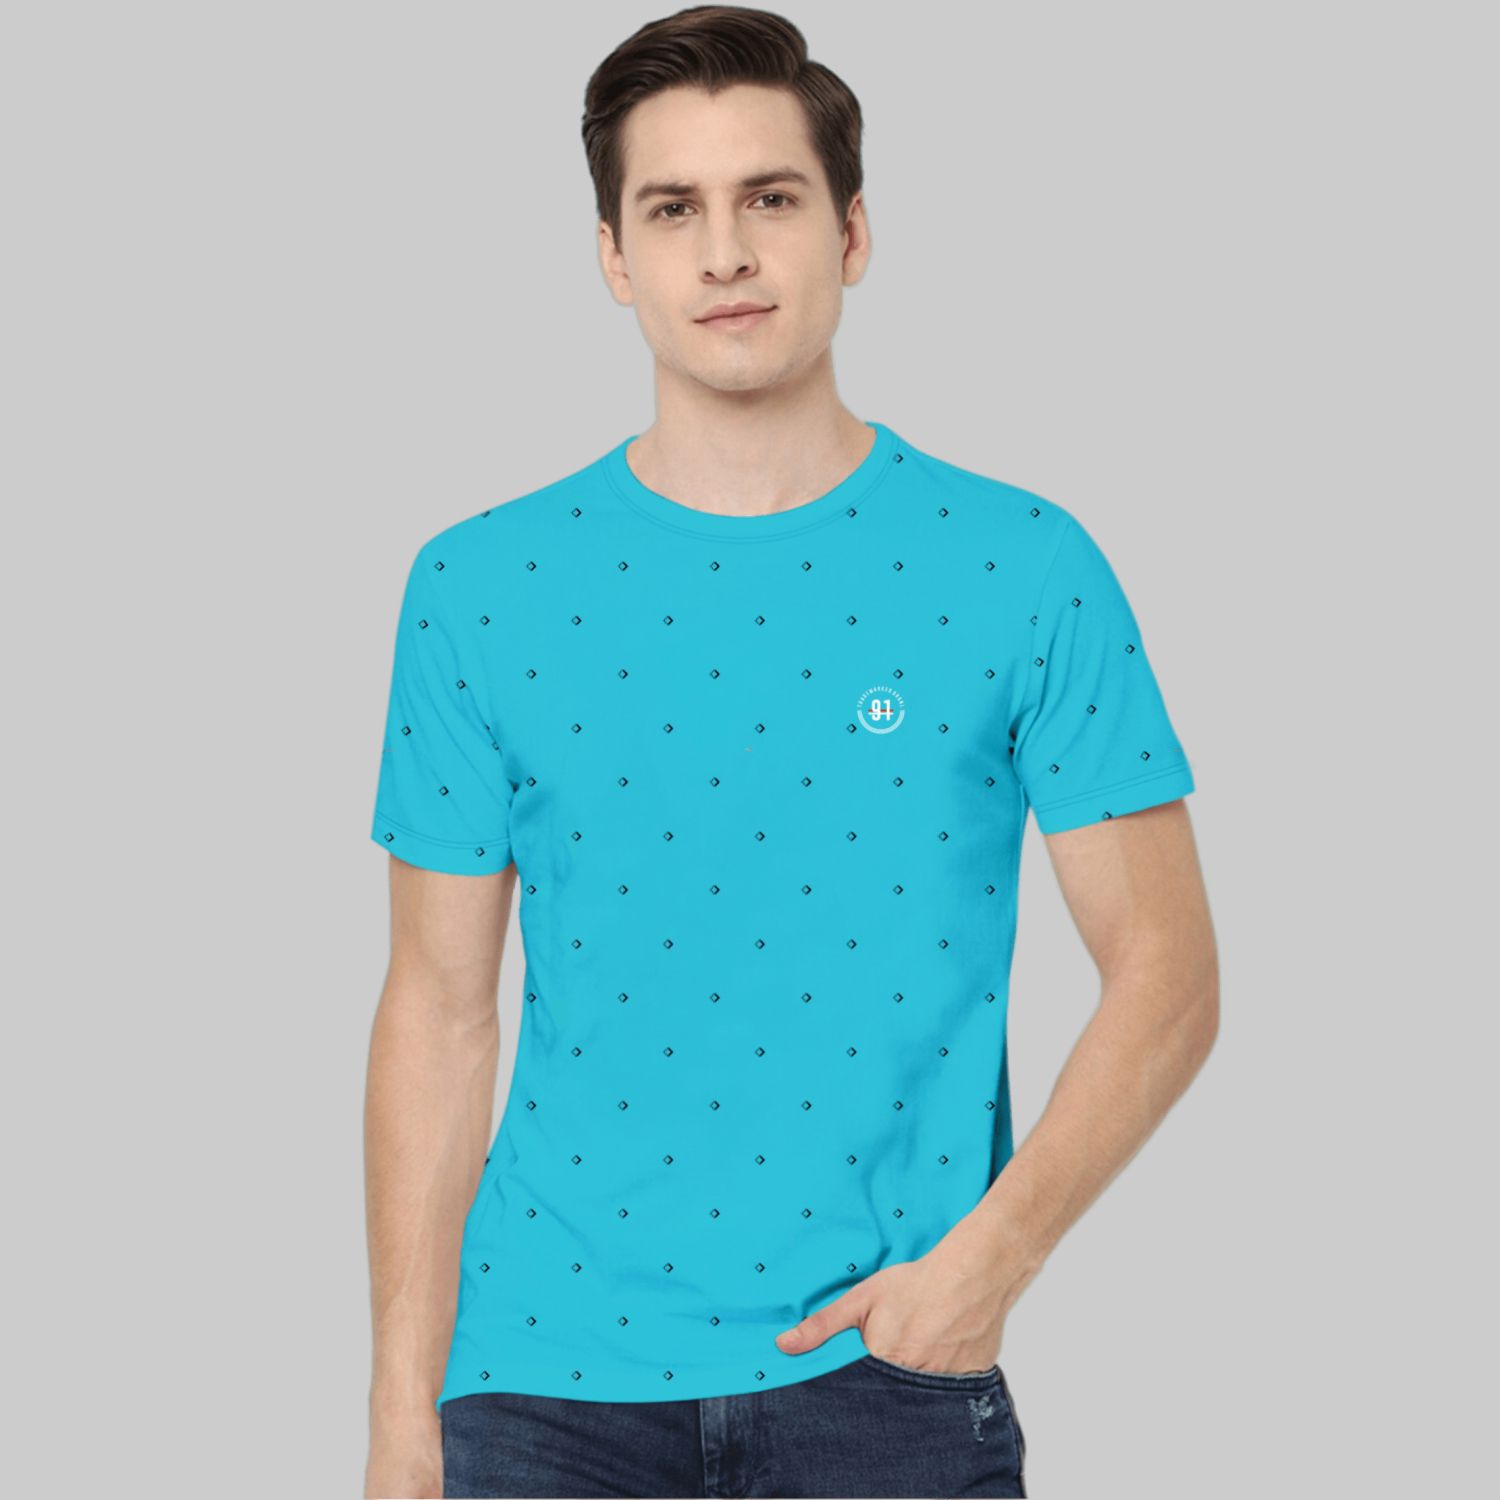     			TAB91 - Turquoise Cotton Blend Slim Fit Men's T-Shirt ( Pack of 1 )